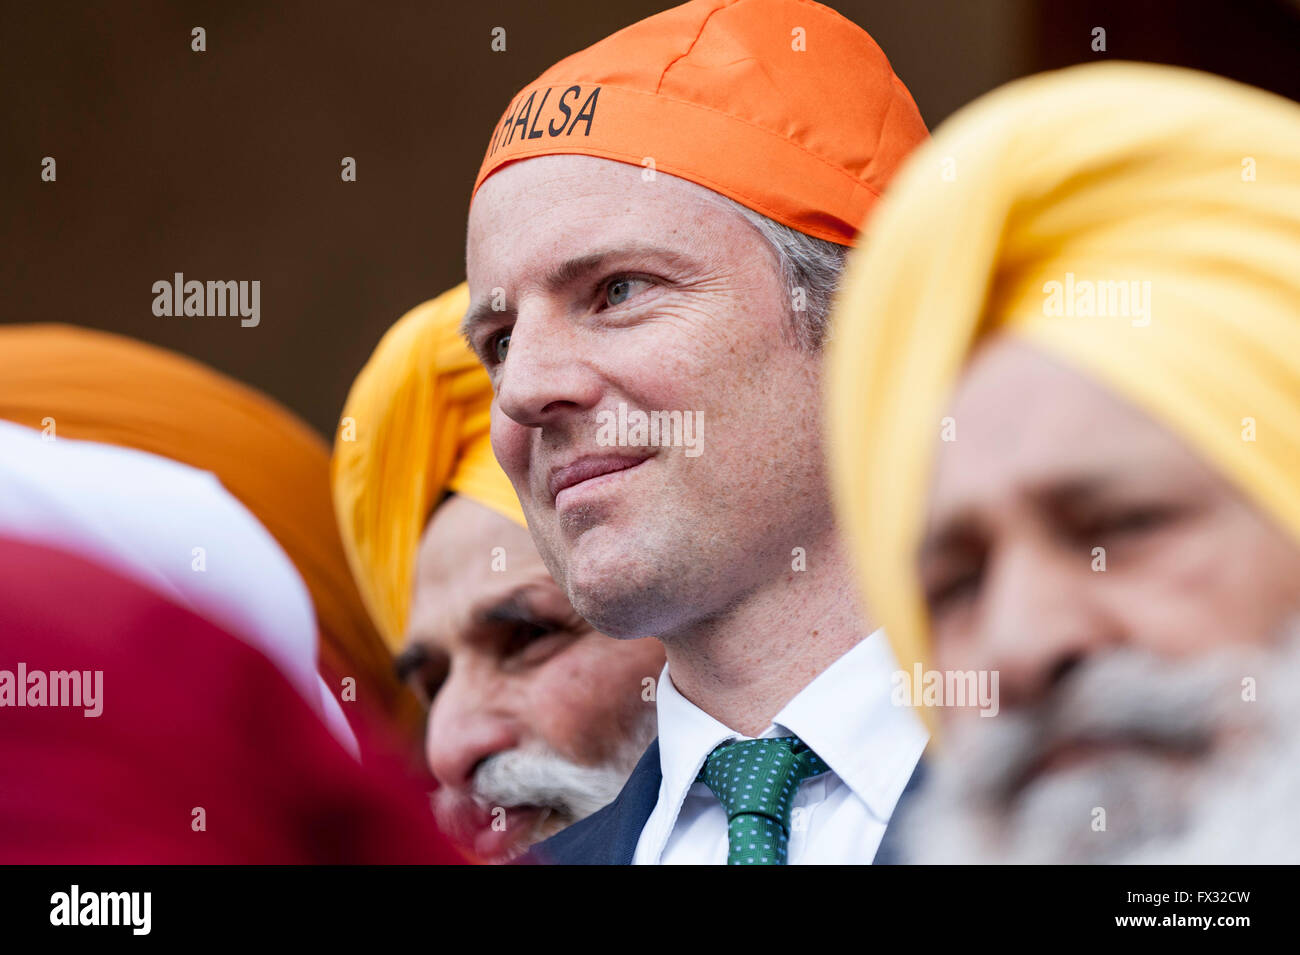 London, UK.  10 April 2016.  Zac Goldsmith MP, Conservative candidate for Mayor of London, visits Gurdwara Sri Guru Singh Sabha temple at the start of the Vaisakhi festival in Southall, west London.  Thousands of Sikhs enjoy the event which celebrates the Sikh New Year and harvest festival.  Credit:  Stephen Chung / Alamy Live News Stock Photo